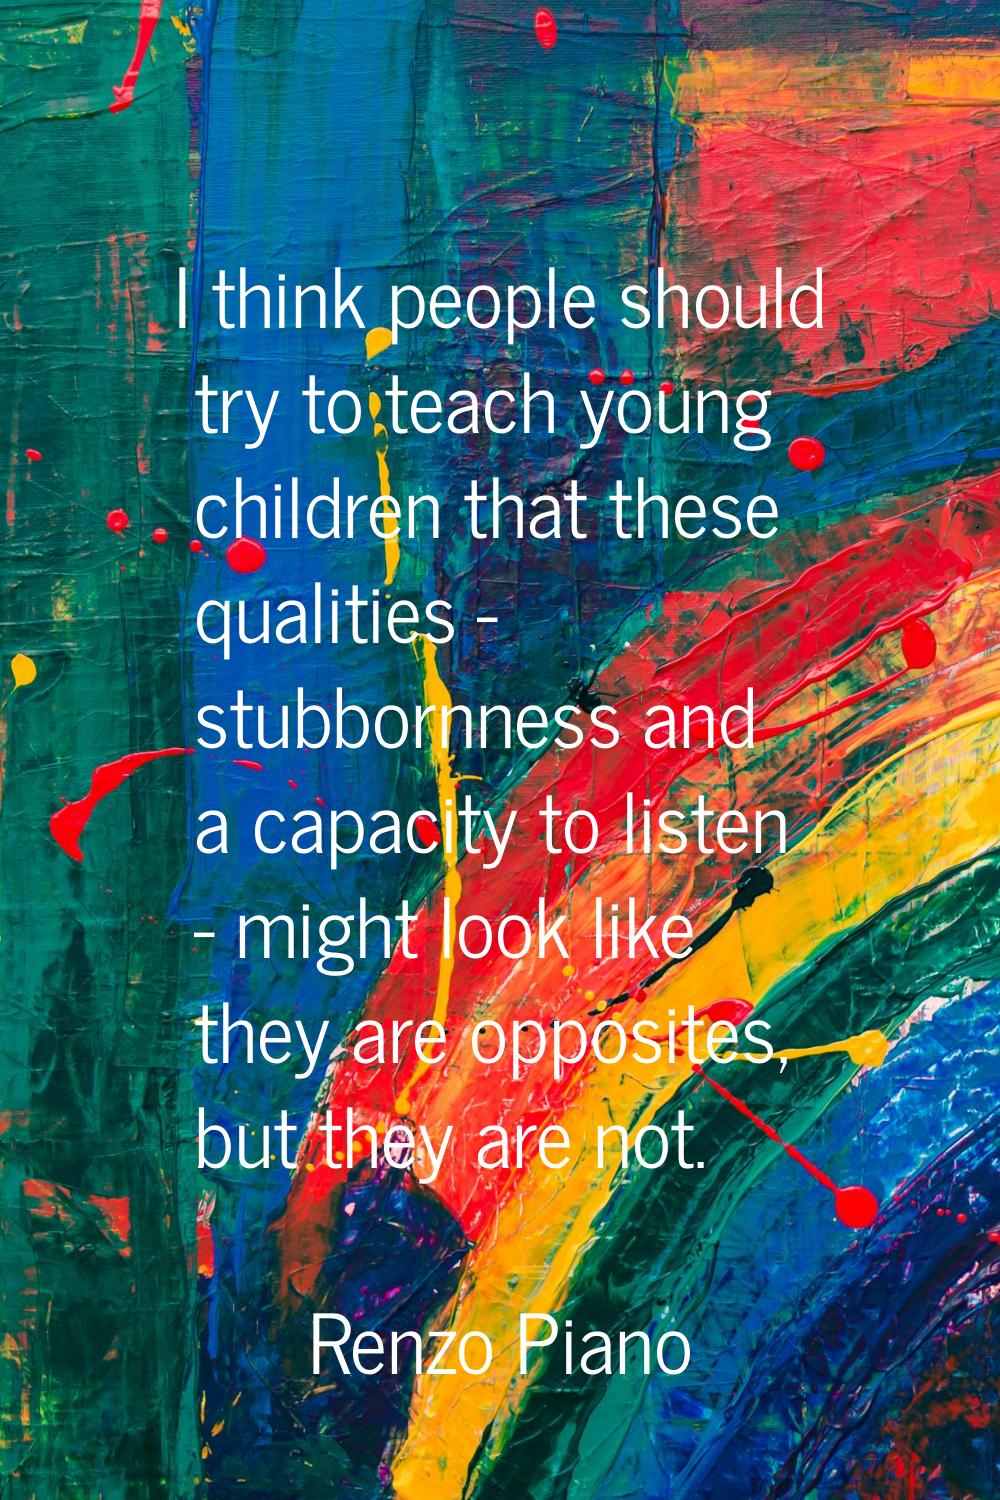 I think people should try to teach young children that these qualities - stubbornness and a capacit